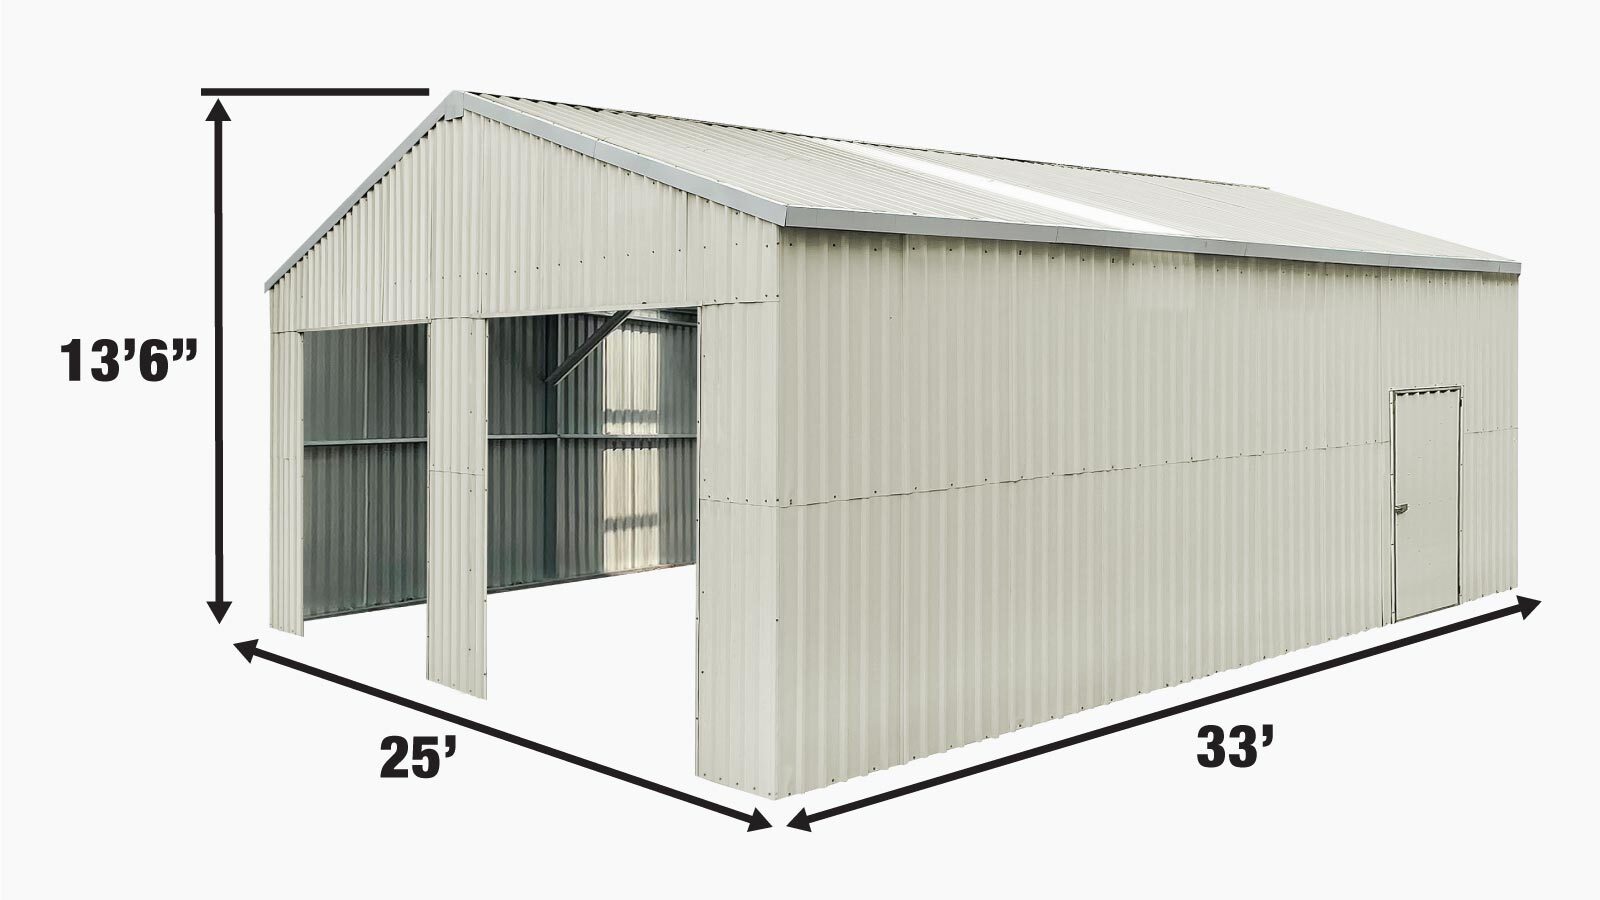 TMG Industrial 25’ x 33’ Double Garage Metal Barn Shed with Side Entry Door, 825 Sq-Ft Floor Space, 9’8” Eave Height, 27 GA Metal, Skylights, 4/12 Roof Pitch, TMG-MS2533-specifications-image